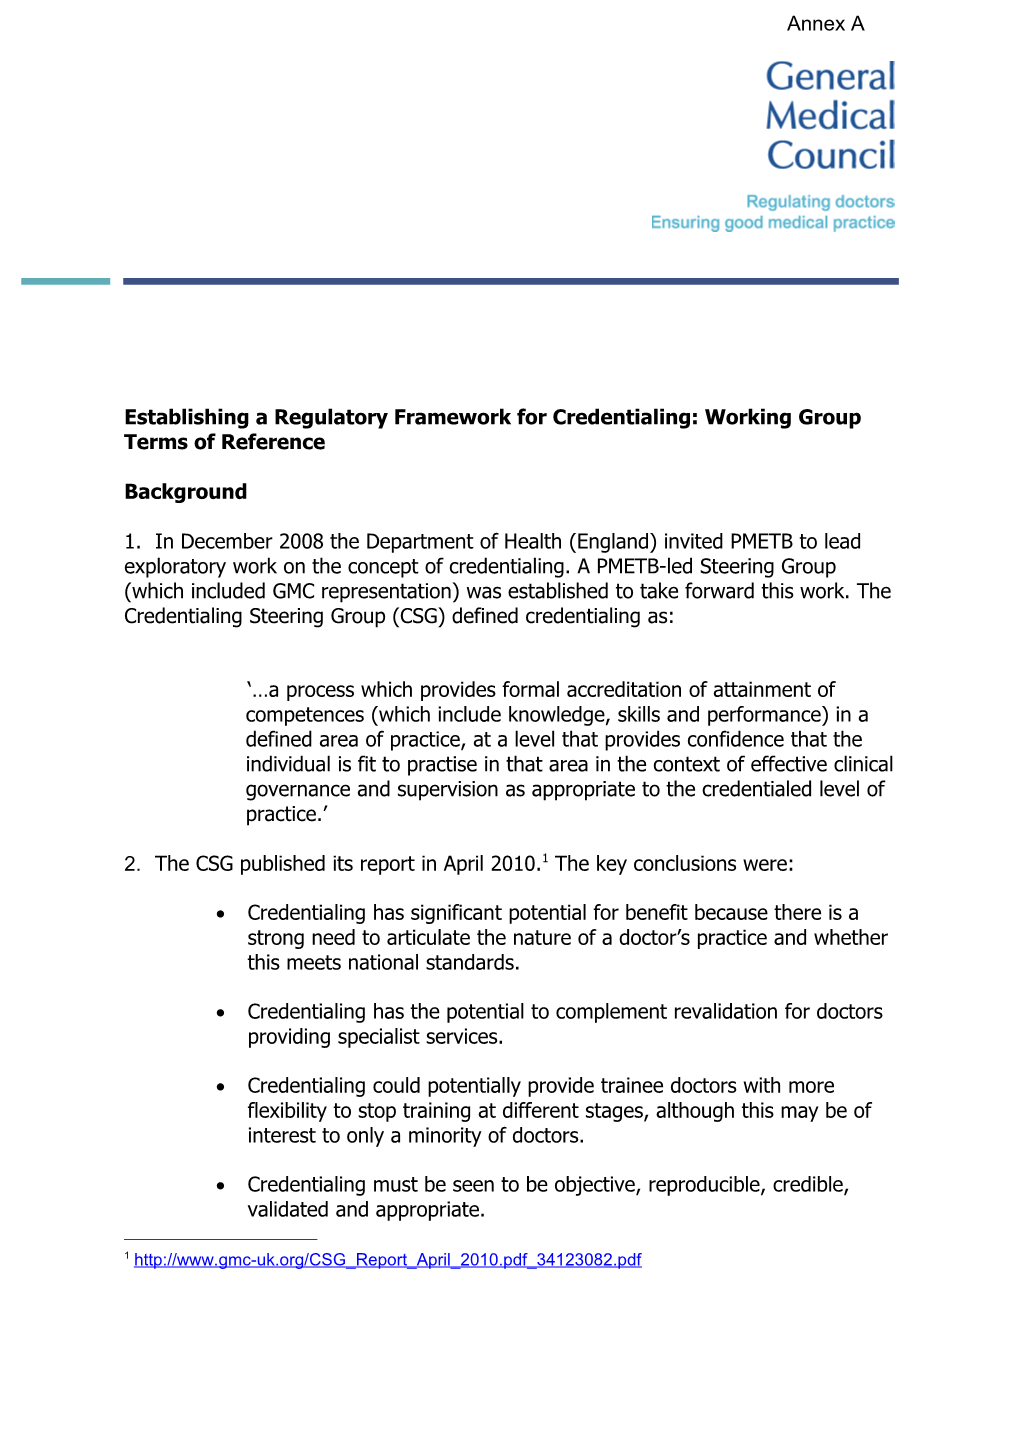 Establishing a Regulatory Framework for Credentialing: Working Group Terms of Reference